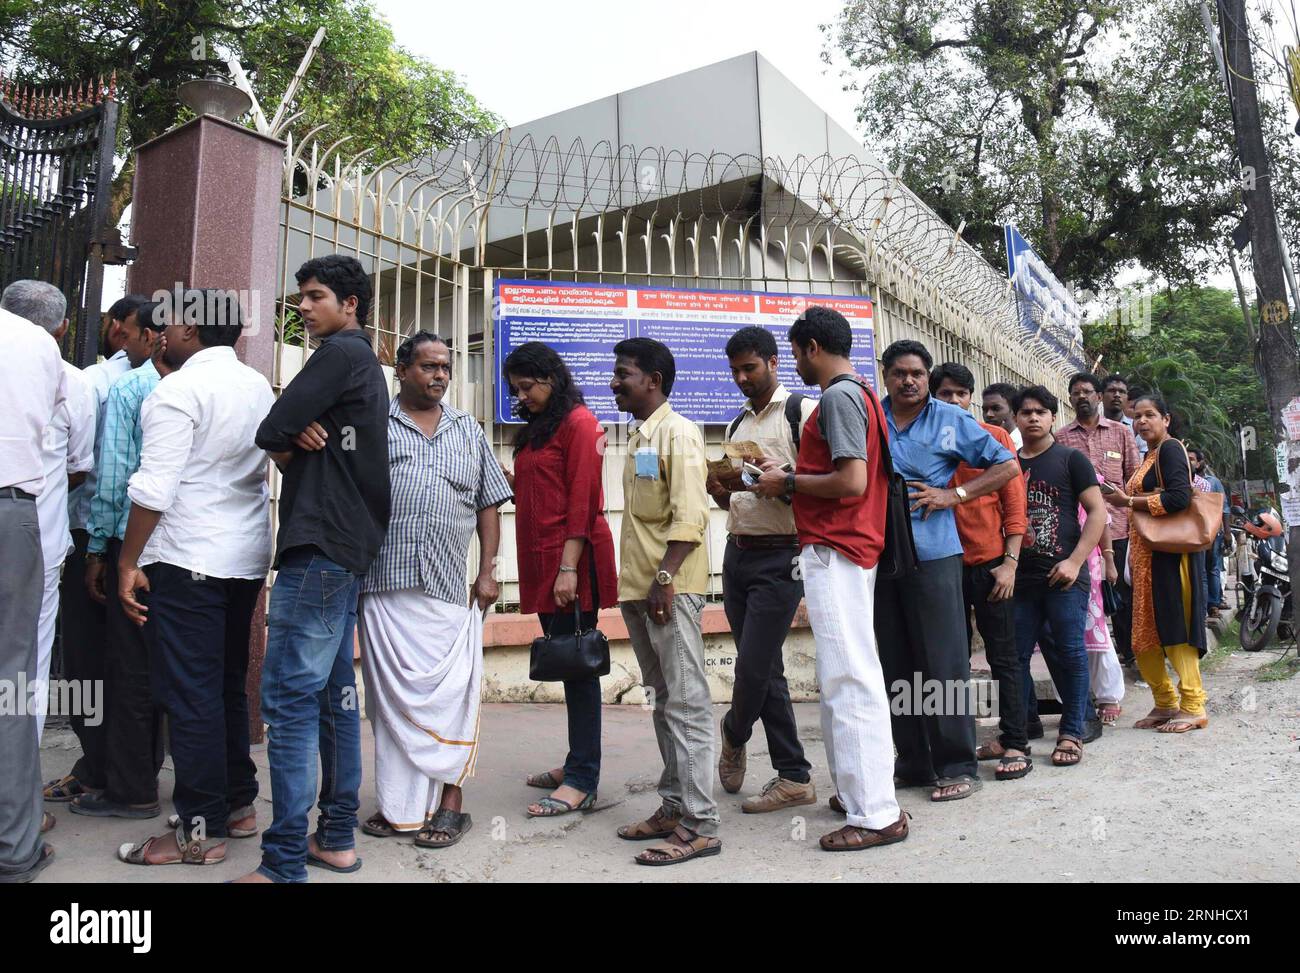 Cash for queues: people paid to stand in line amid India's bank